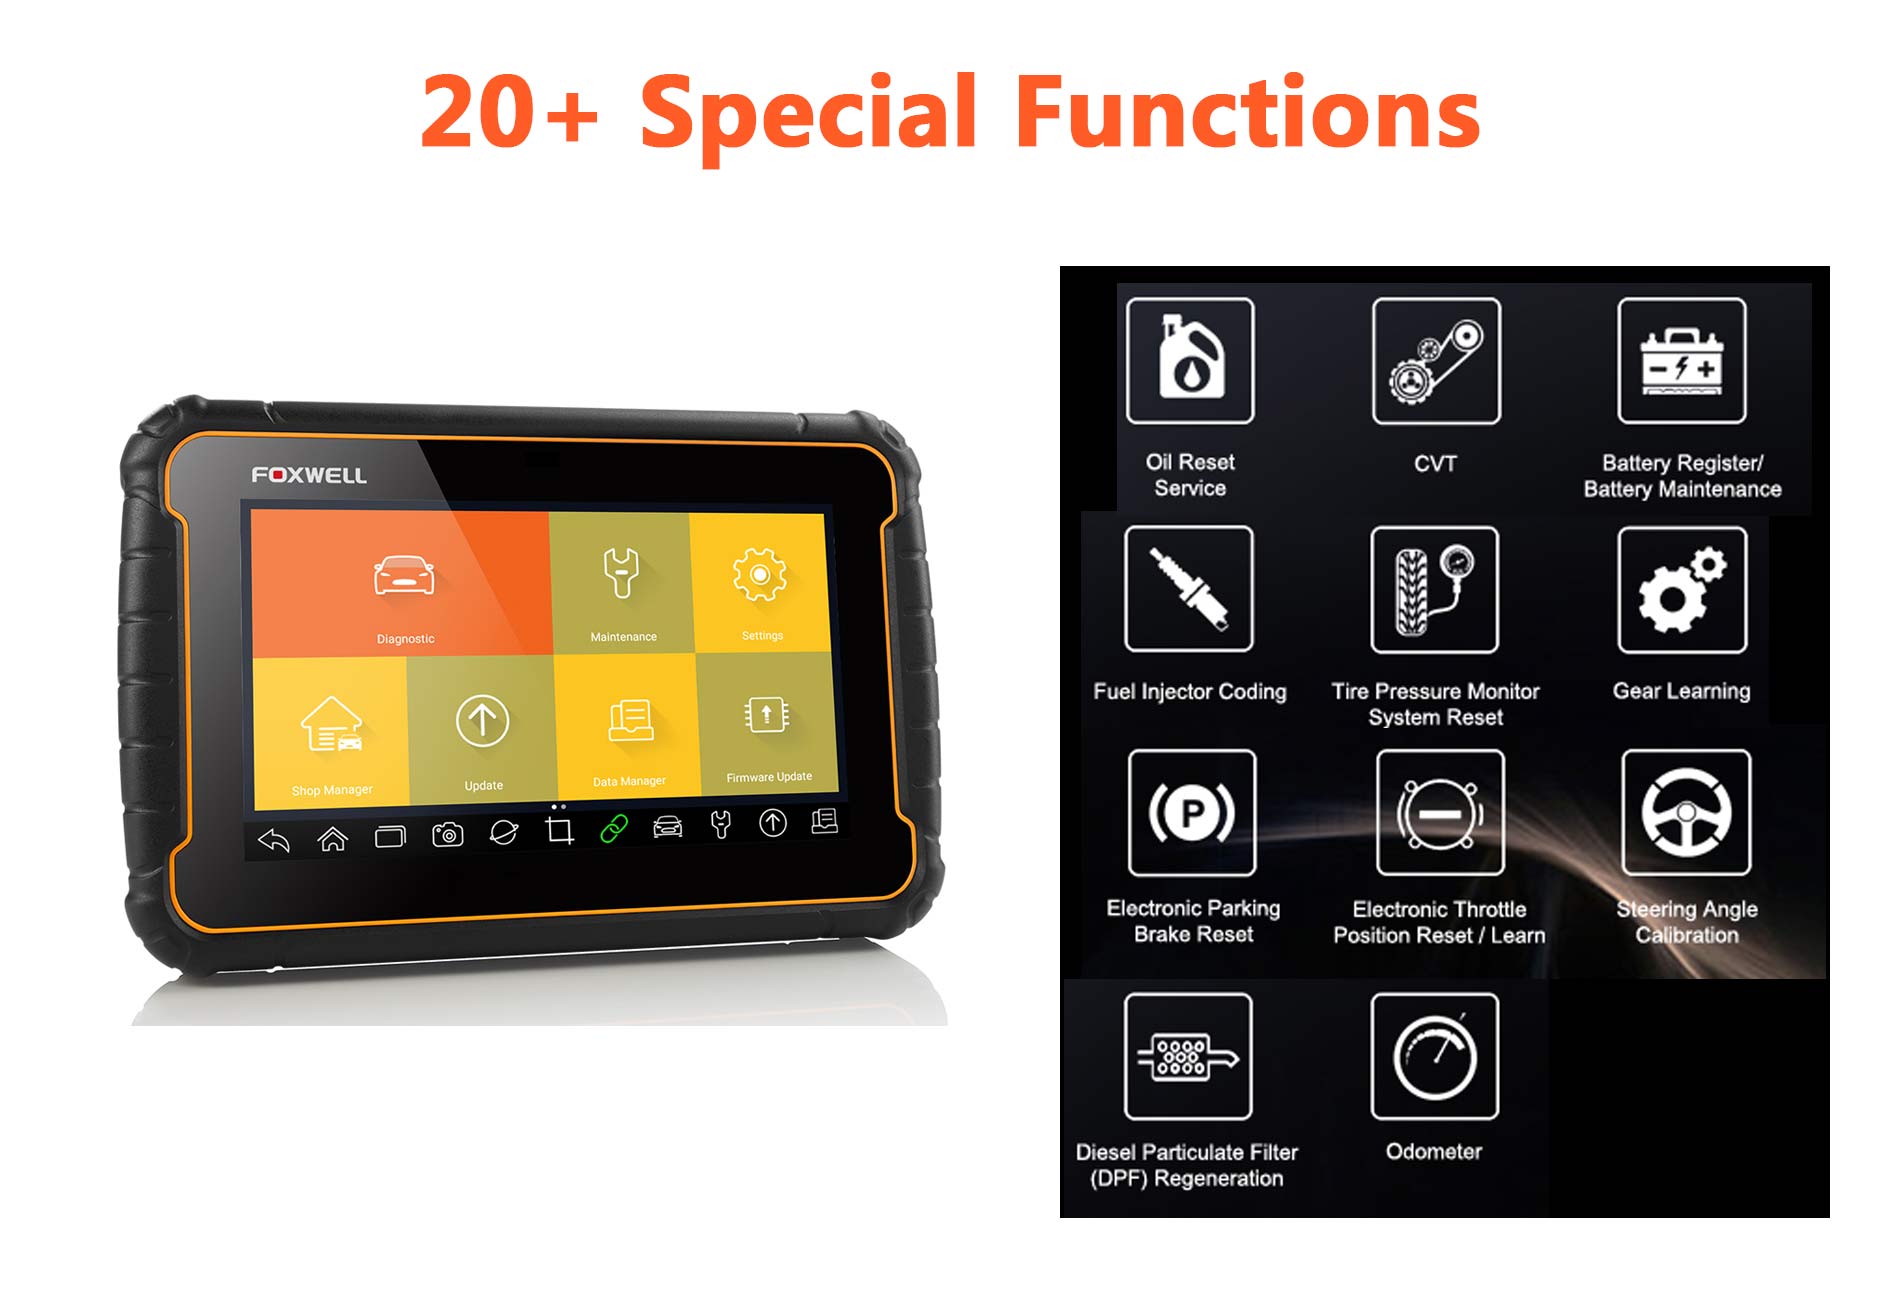 FOXWELL GT60 SPECIAL FUNCTION LIST